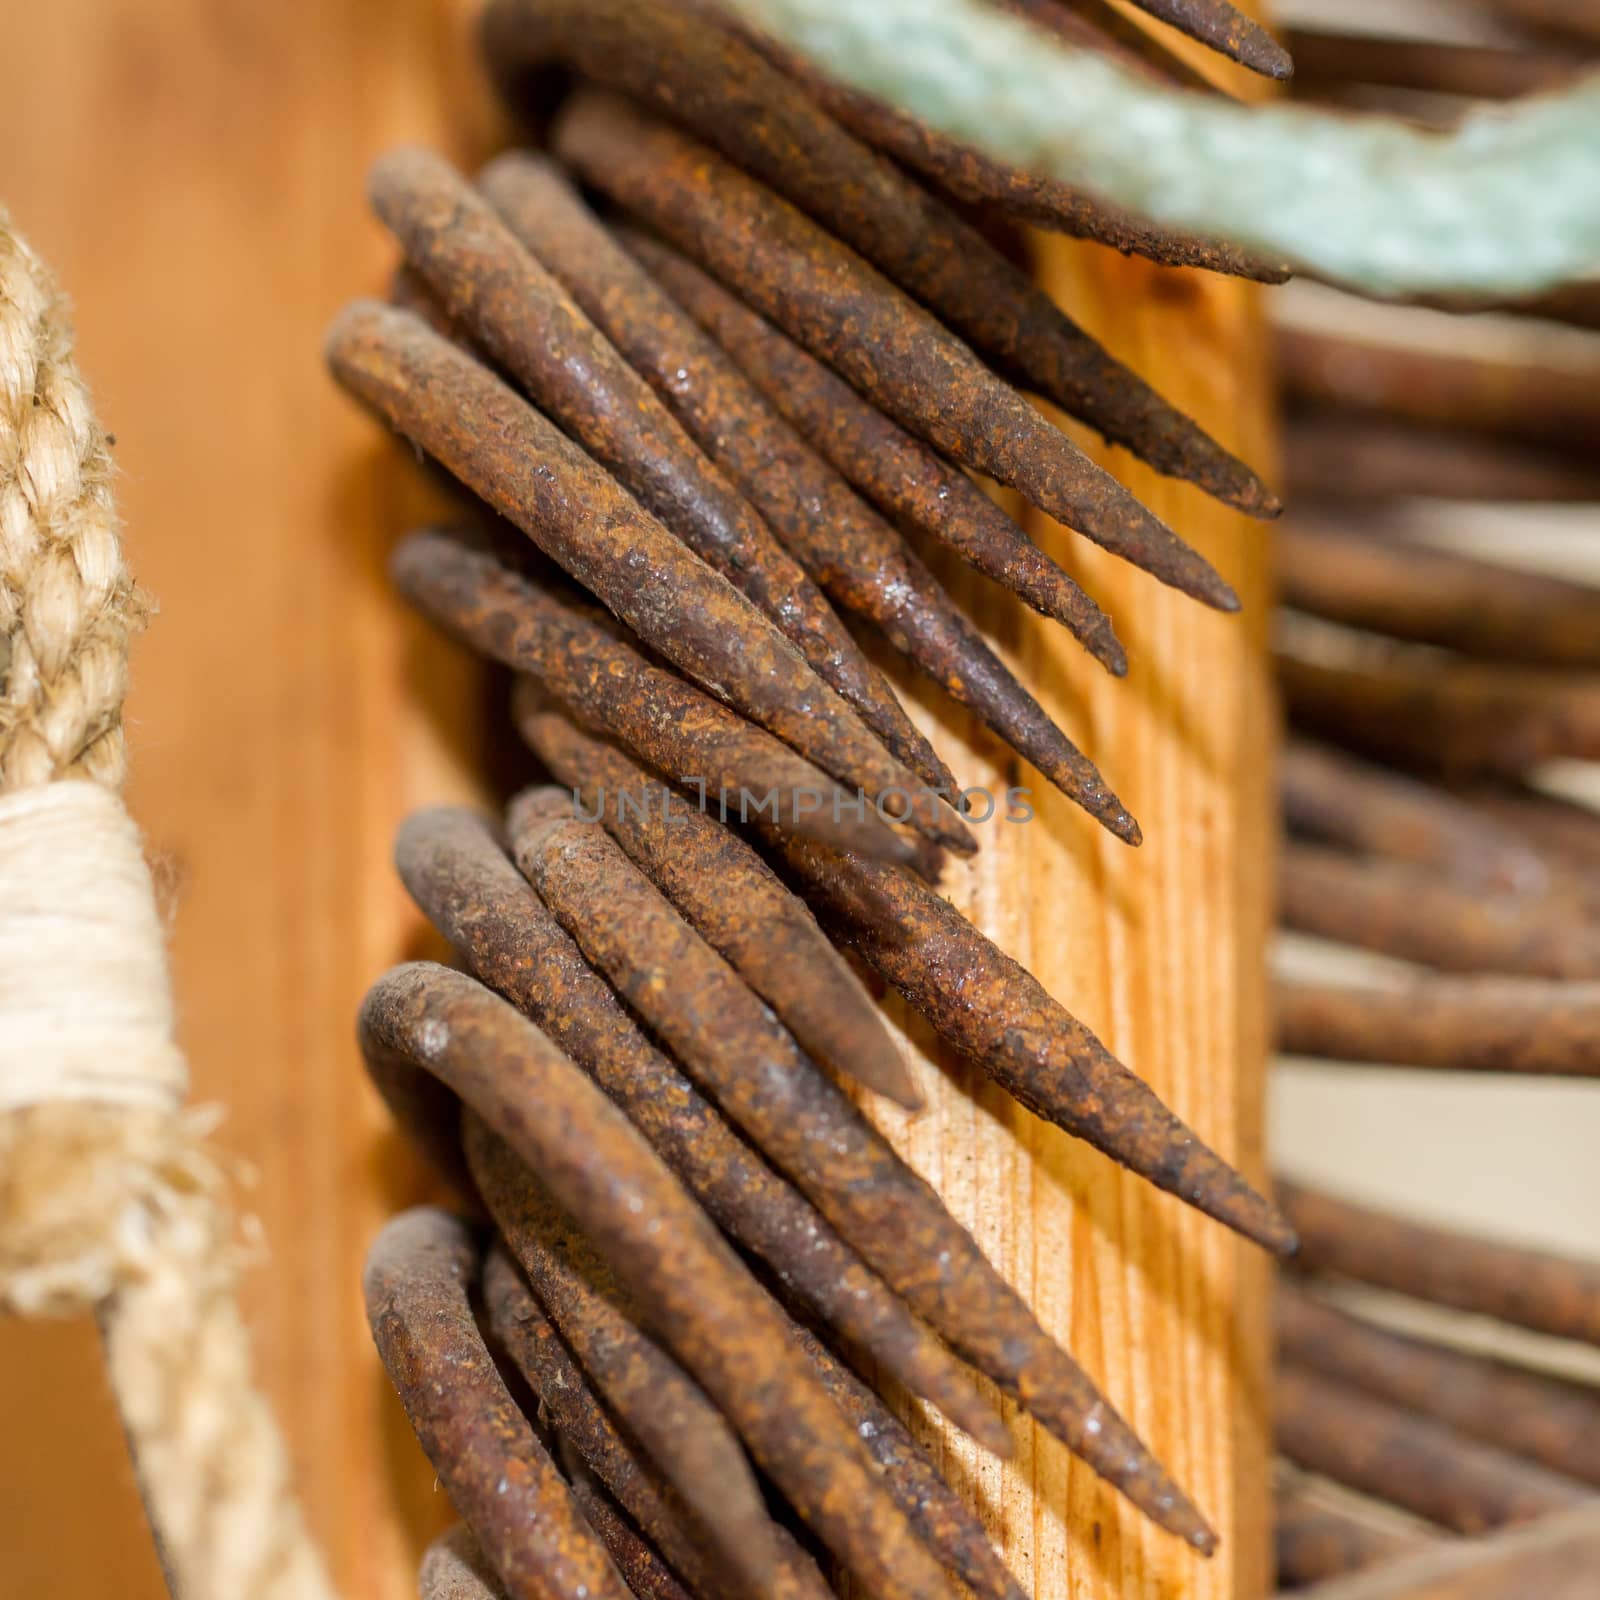 Old rusted fishing hooks - Close-up by michaklootwijk